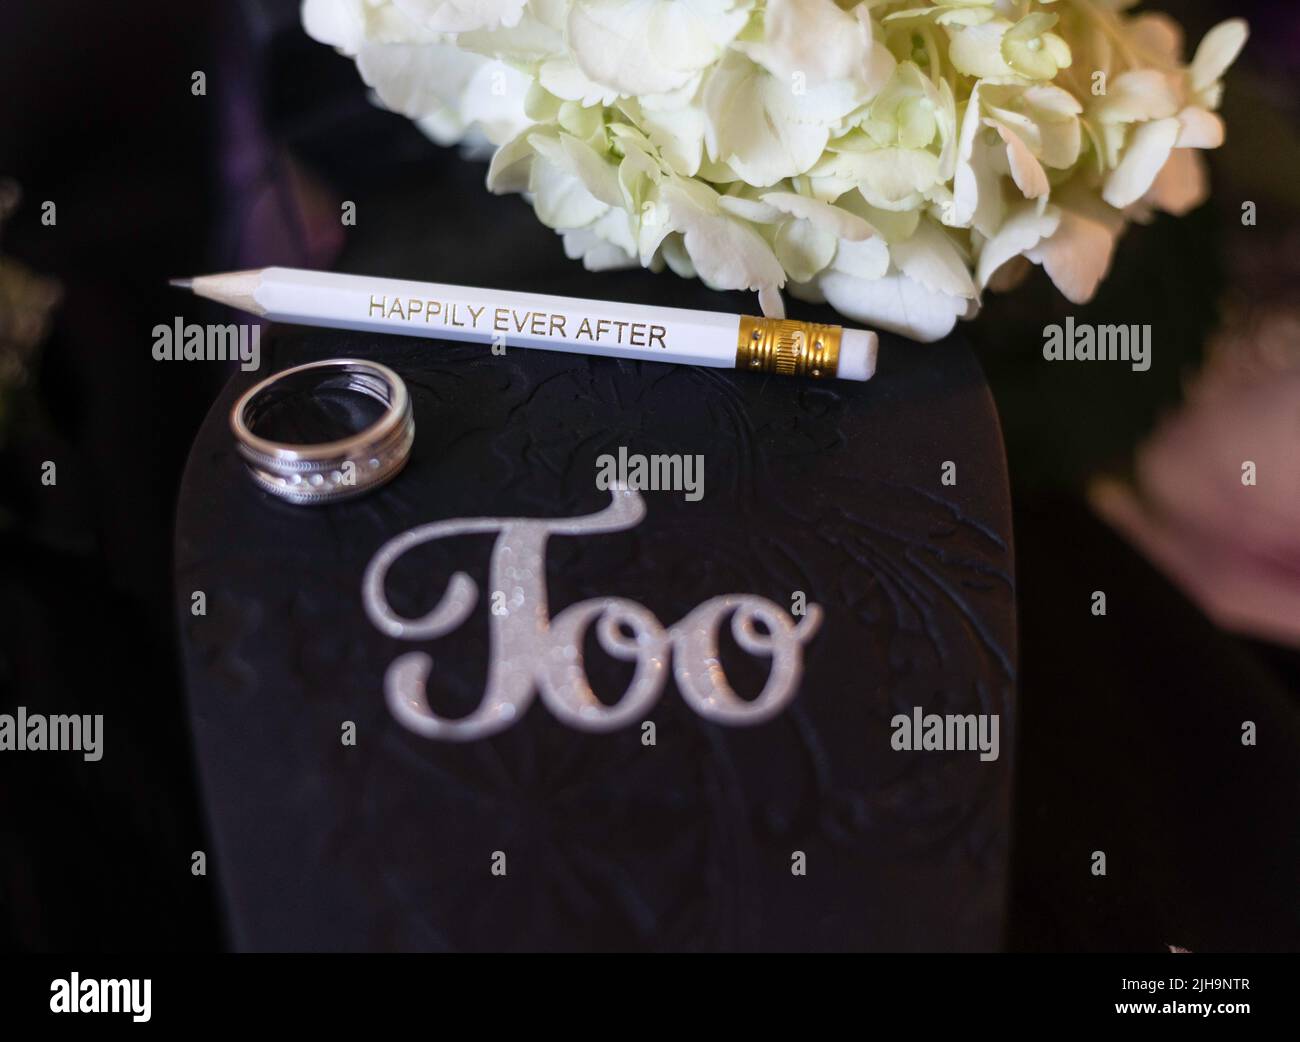 Grooms Ring Happily Ever After Stockfoto